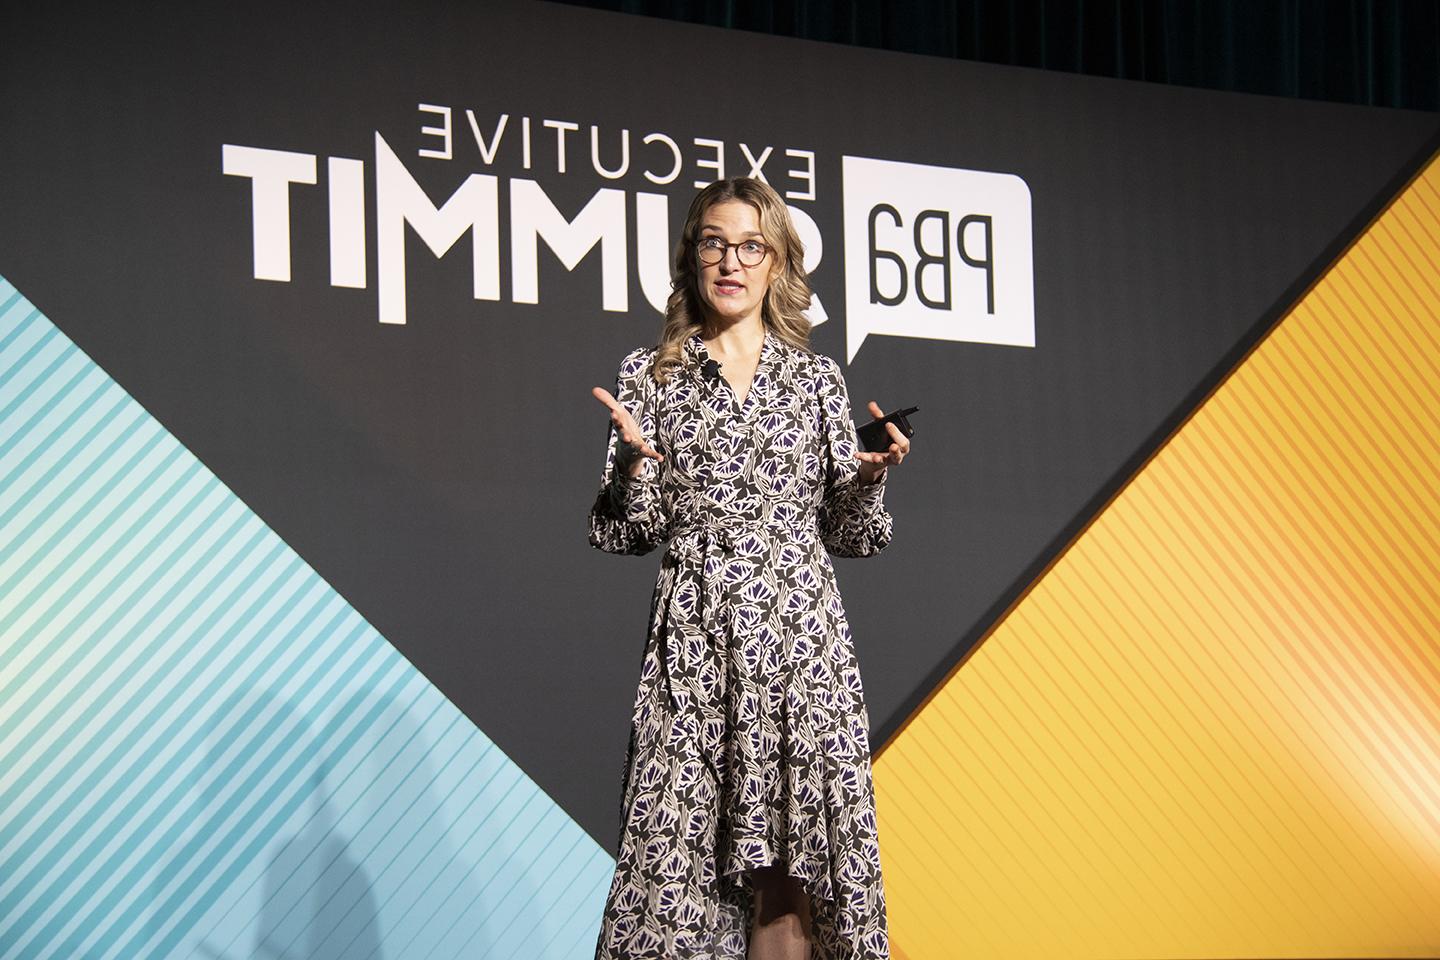 Image of a woman speaking at the executive summit